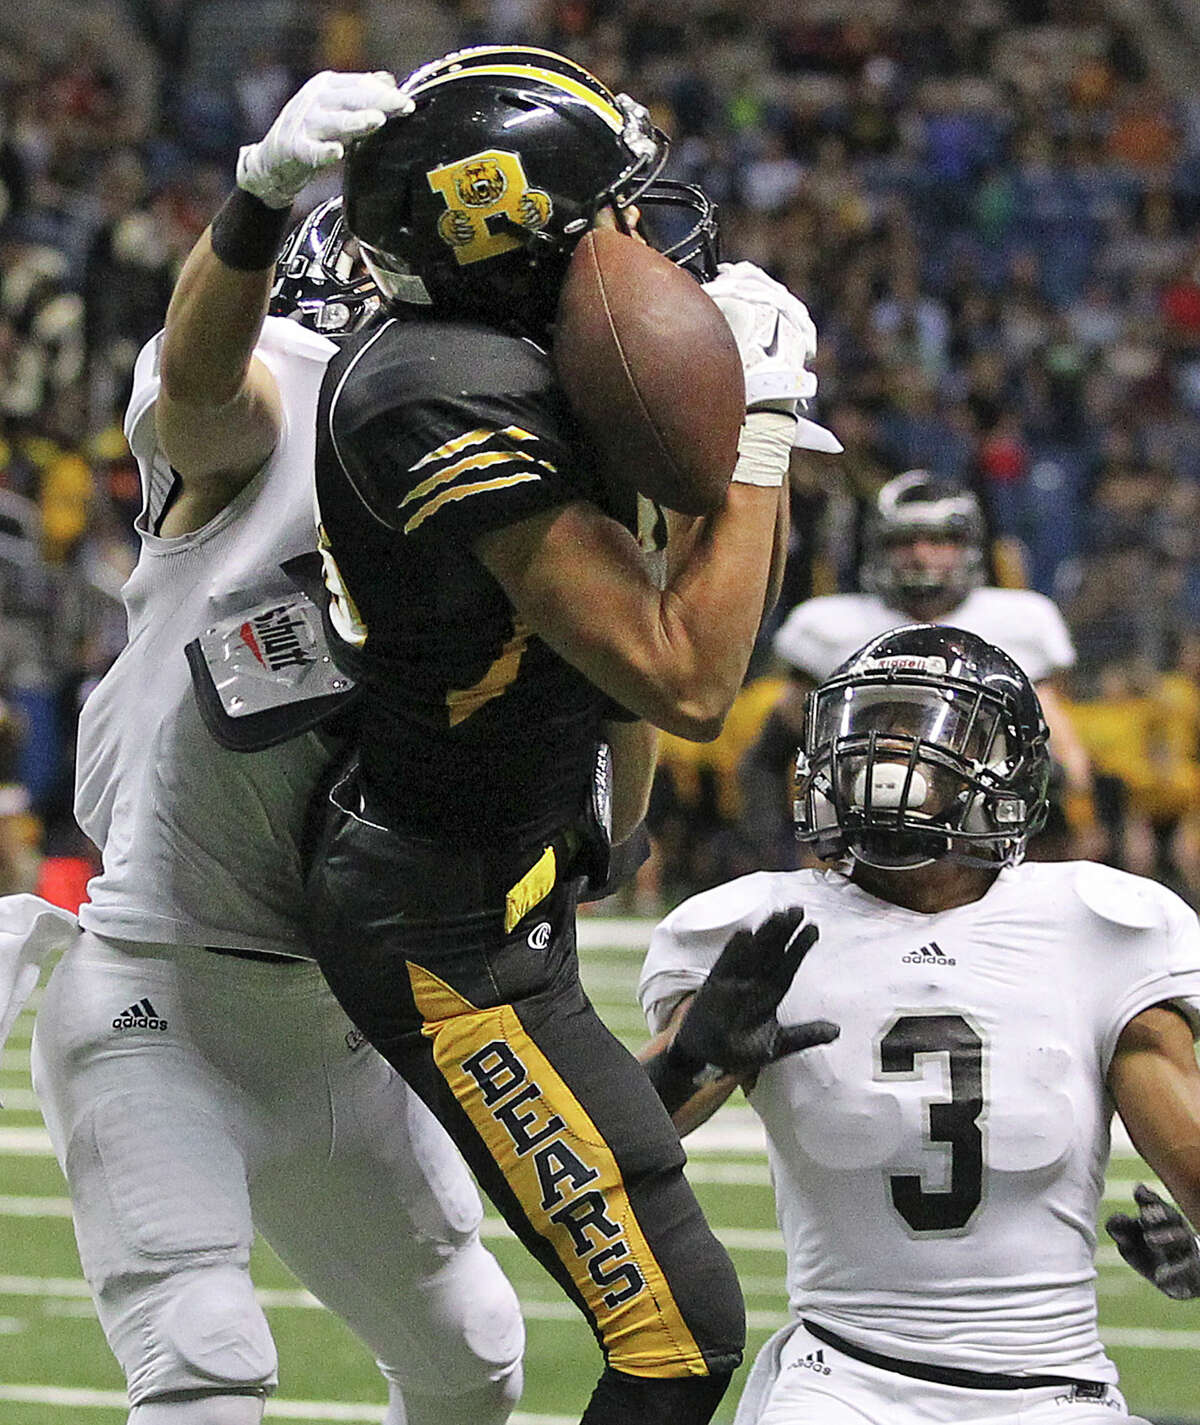 Bear receiver Dayne Thomas can't make the catch near the goal as defenders Mark Frankhouser (left) and Malik Perez pressure as Steele plays Brennan at the Alamodome in second round 6A high school Division I I playoff action on November 22, 2014.